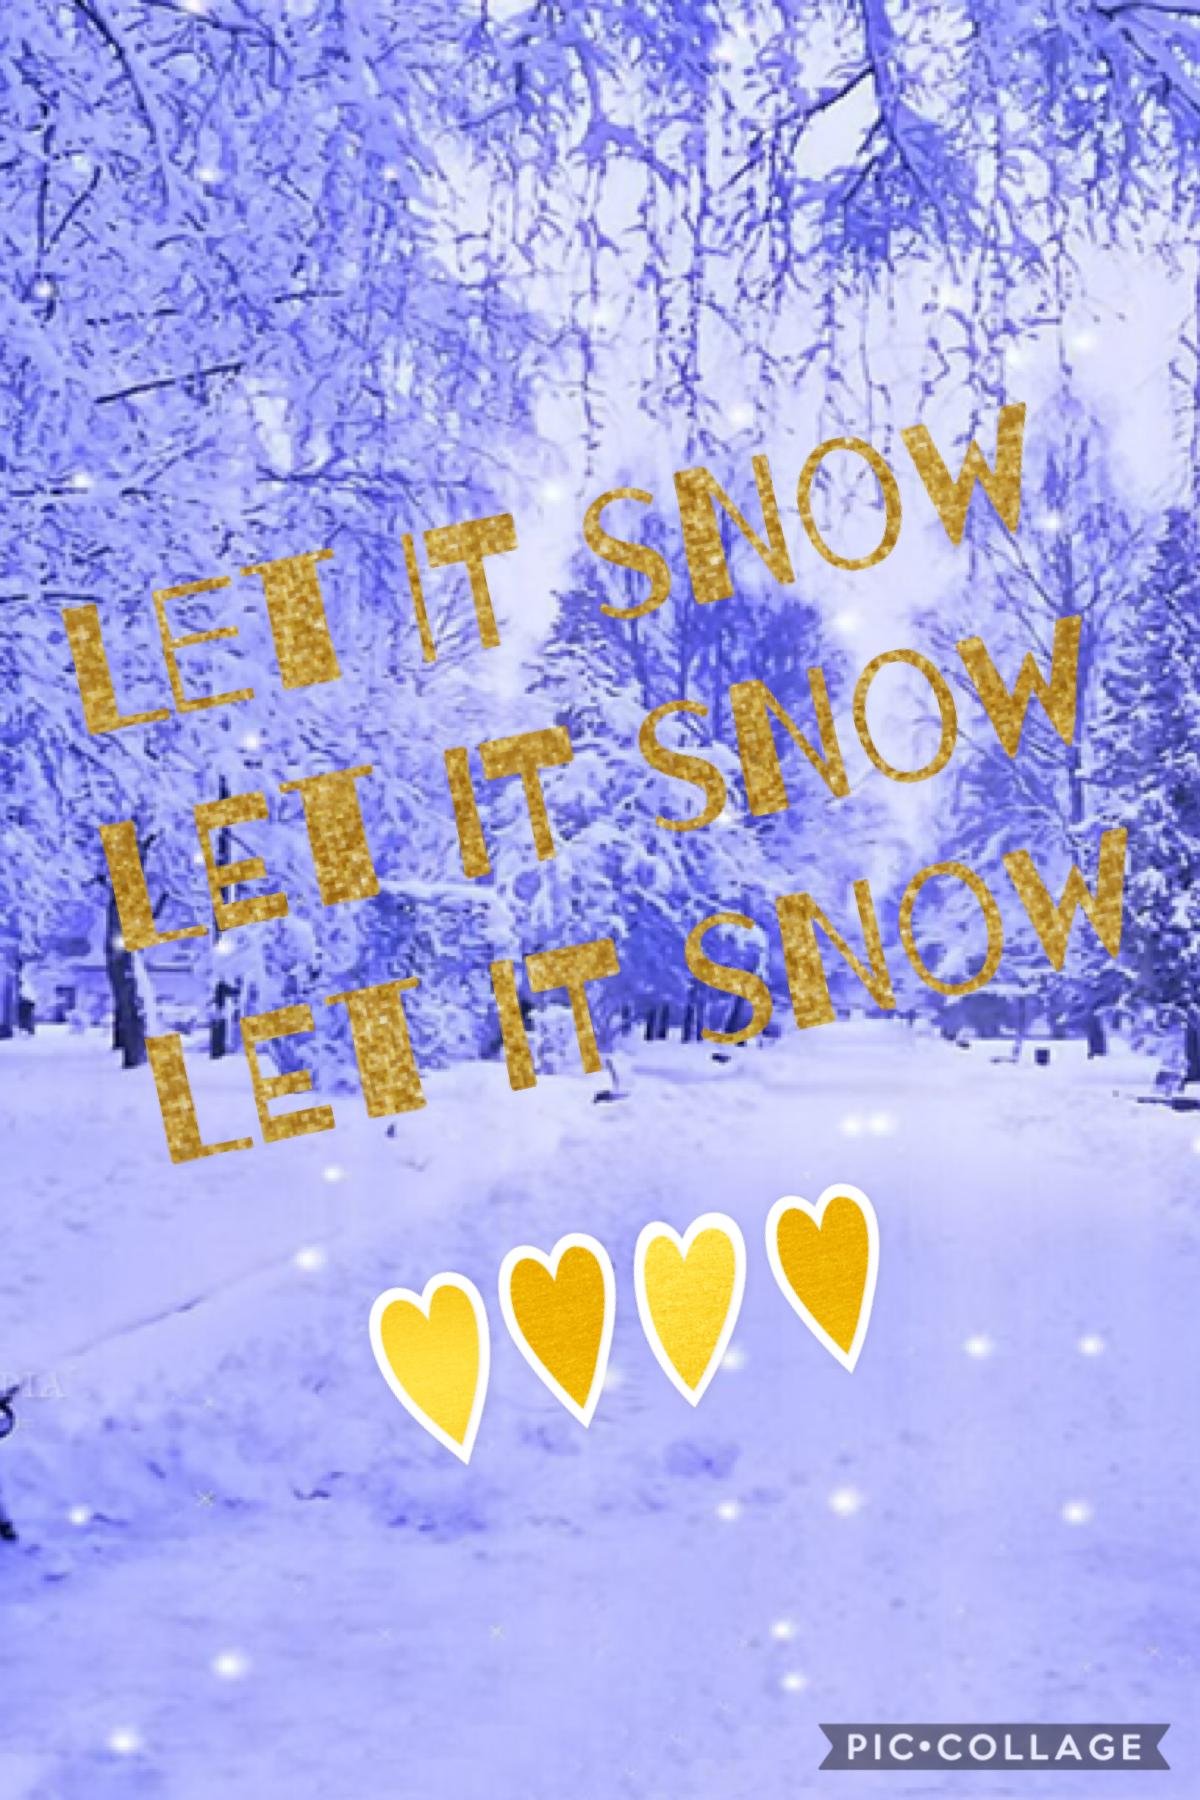 Which it was snowing follow me and like this post!!